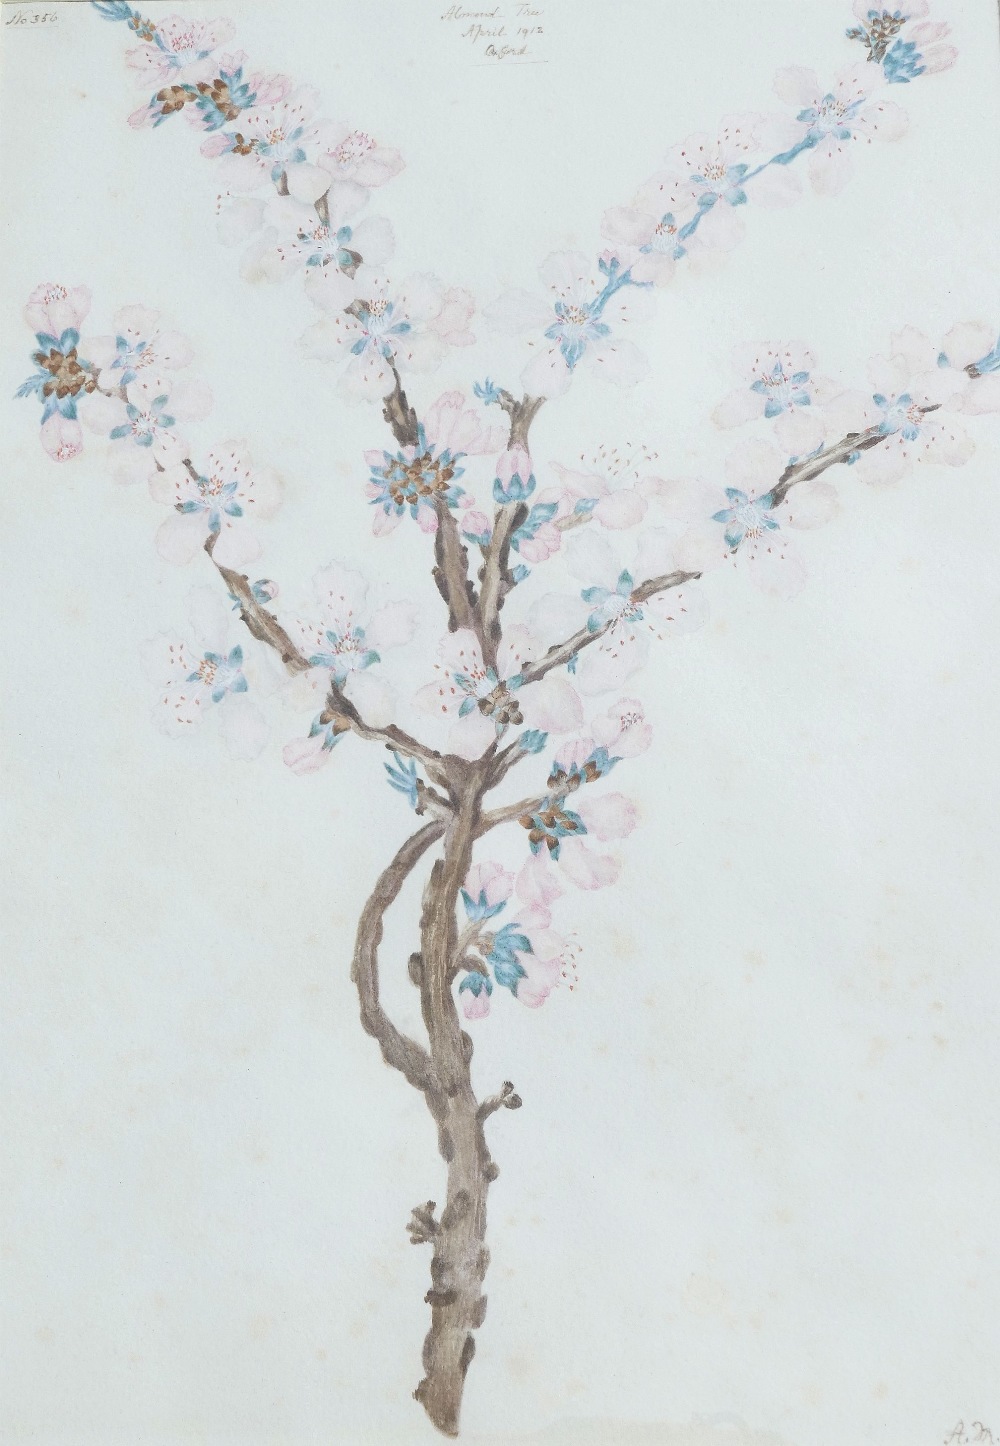 Early 20th century British, 'Almond Tree', watercolour, numbered 356, titled and dated 'April - Image 3 of 5